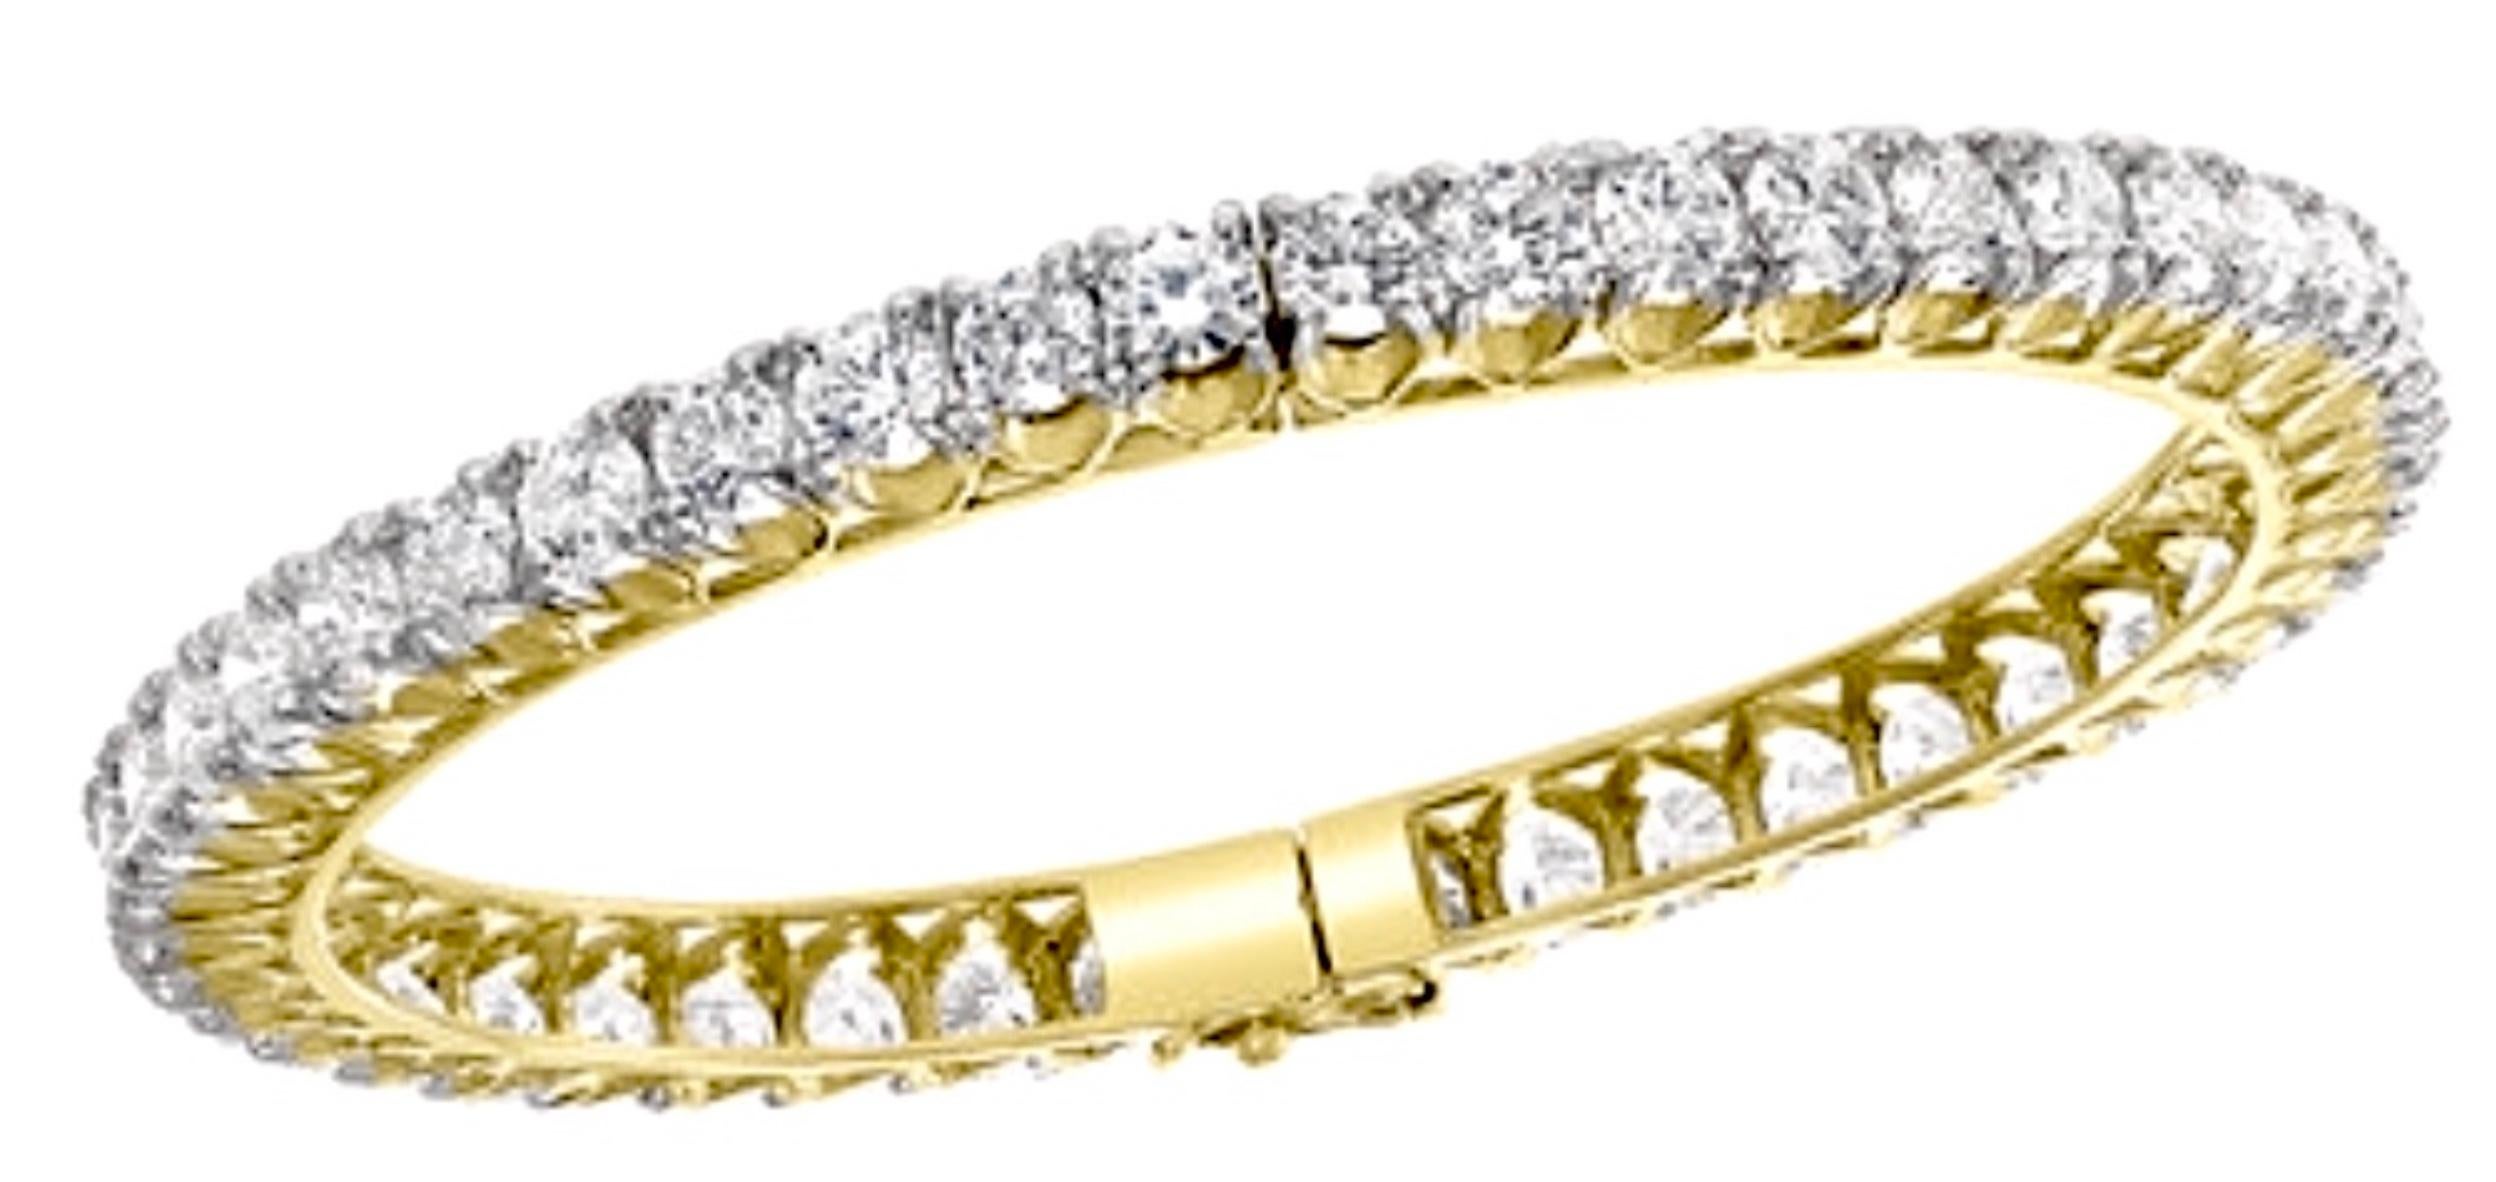 Single line 30 pointer,29 Ct total diamond weight  Contemporary  18 Karat  Yellow  Gold & Diamond  Eternity Bangle Bracelet 
It features Two  bangles  crafted from  18k Yellow gold   embedded with  28.81  Carats of  Round brilliant diamonds in two